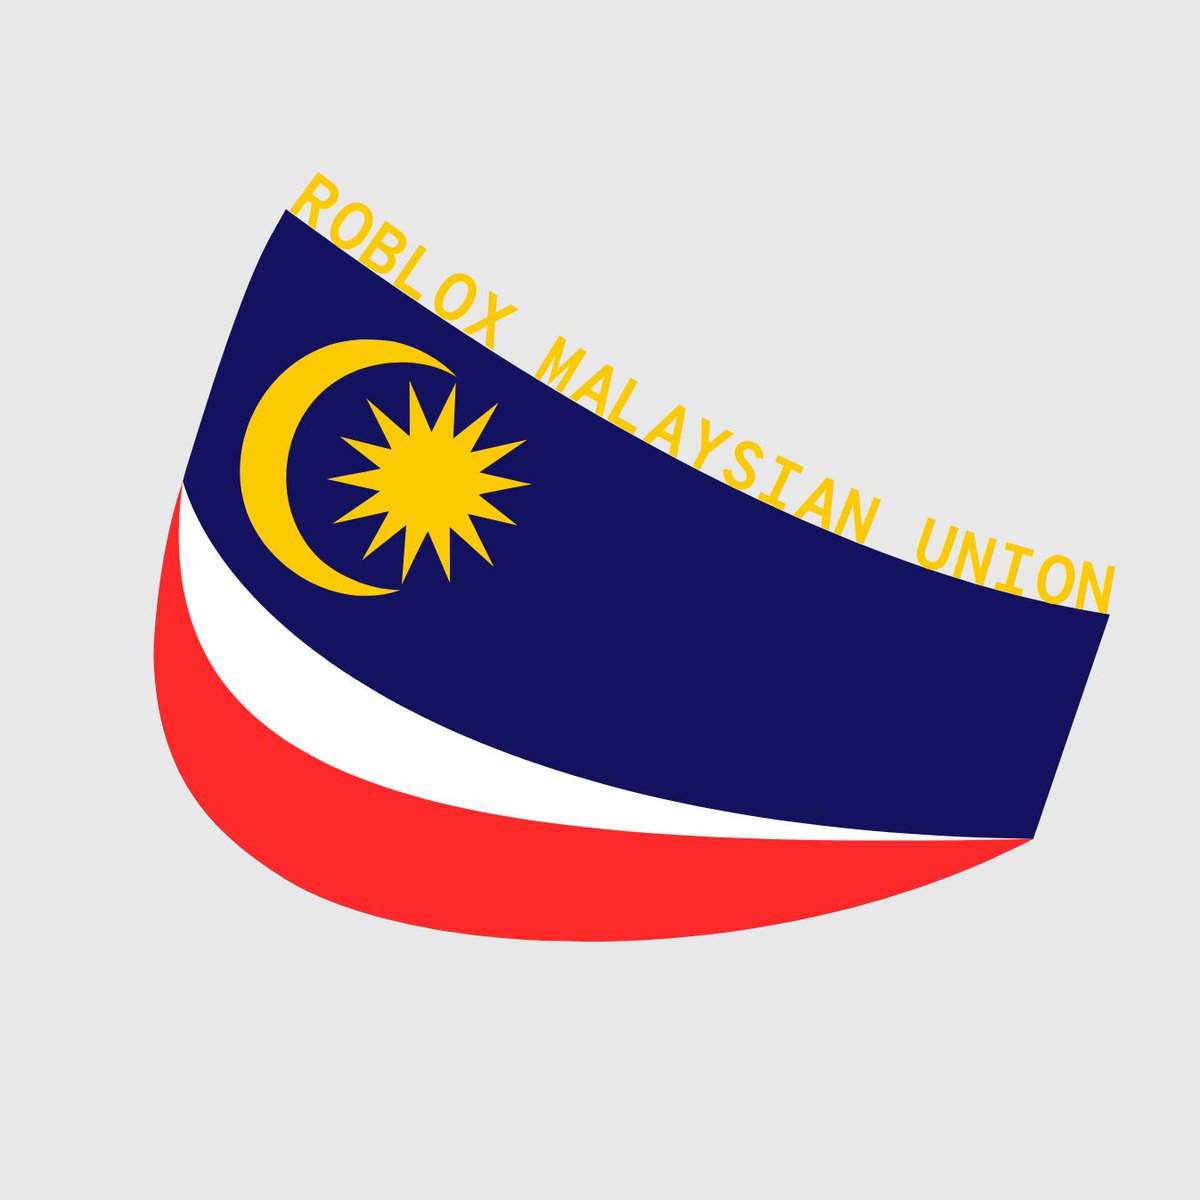 Roblox Malaysian Union On Twitter New Logo What Are Your Thoughts About It - roblox un logosu